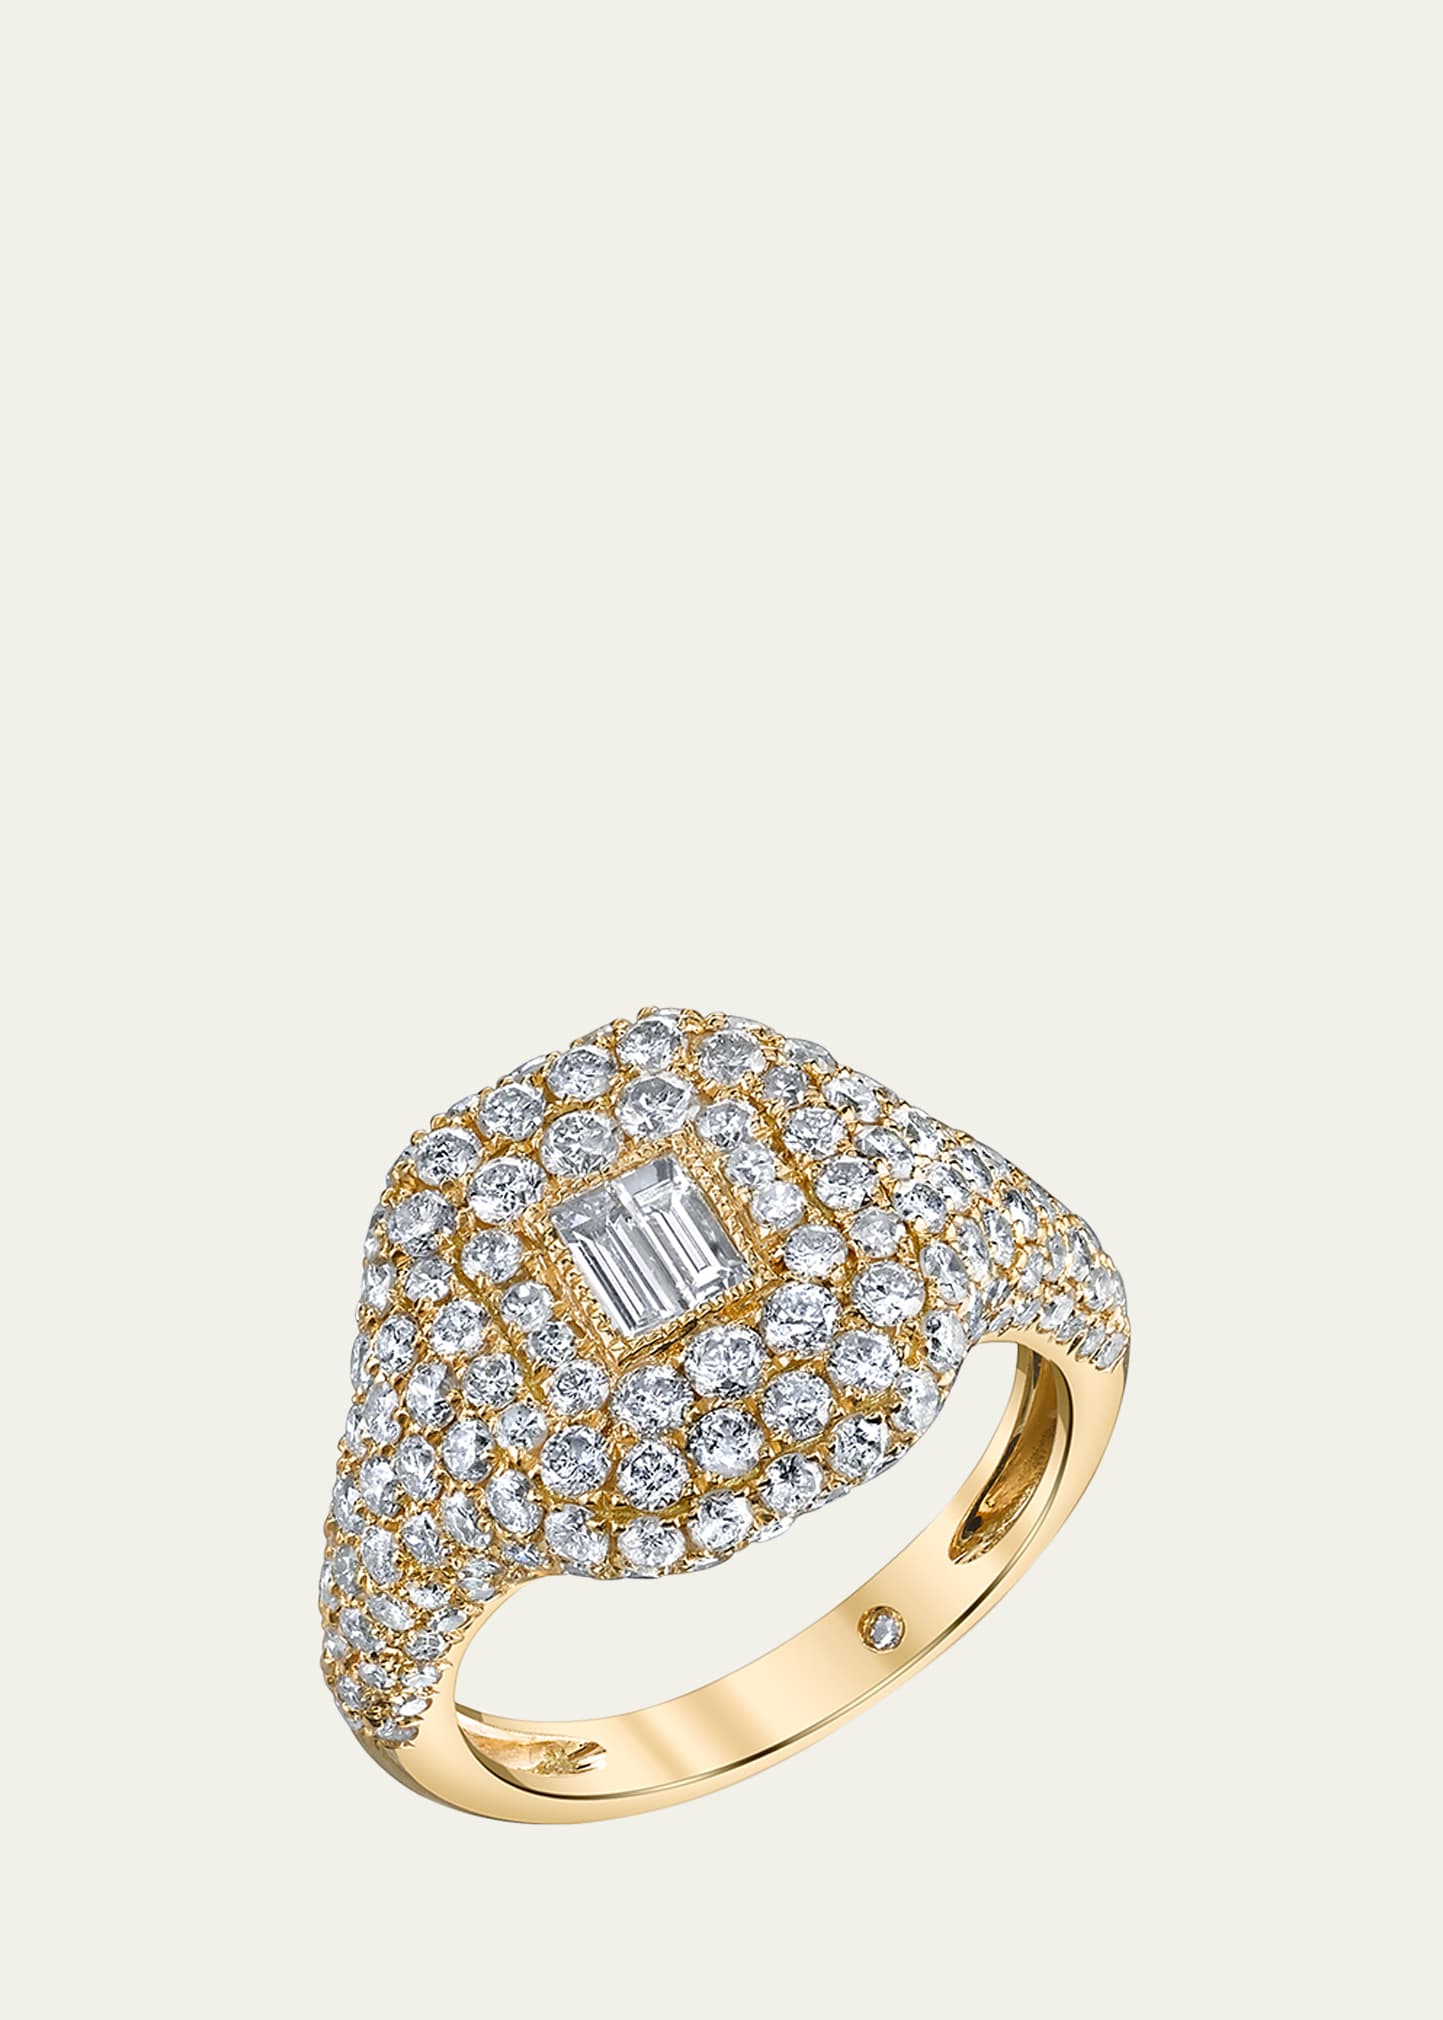 SHAY 18K YELLOW GOLD DIAMOND BAGUETTE PAVE RING